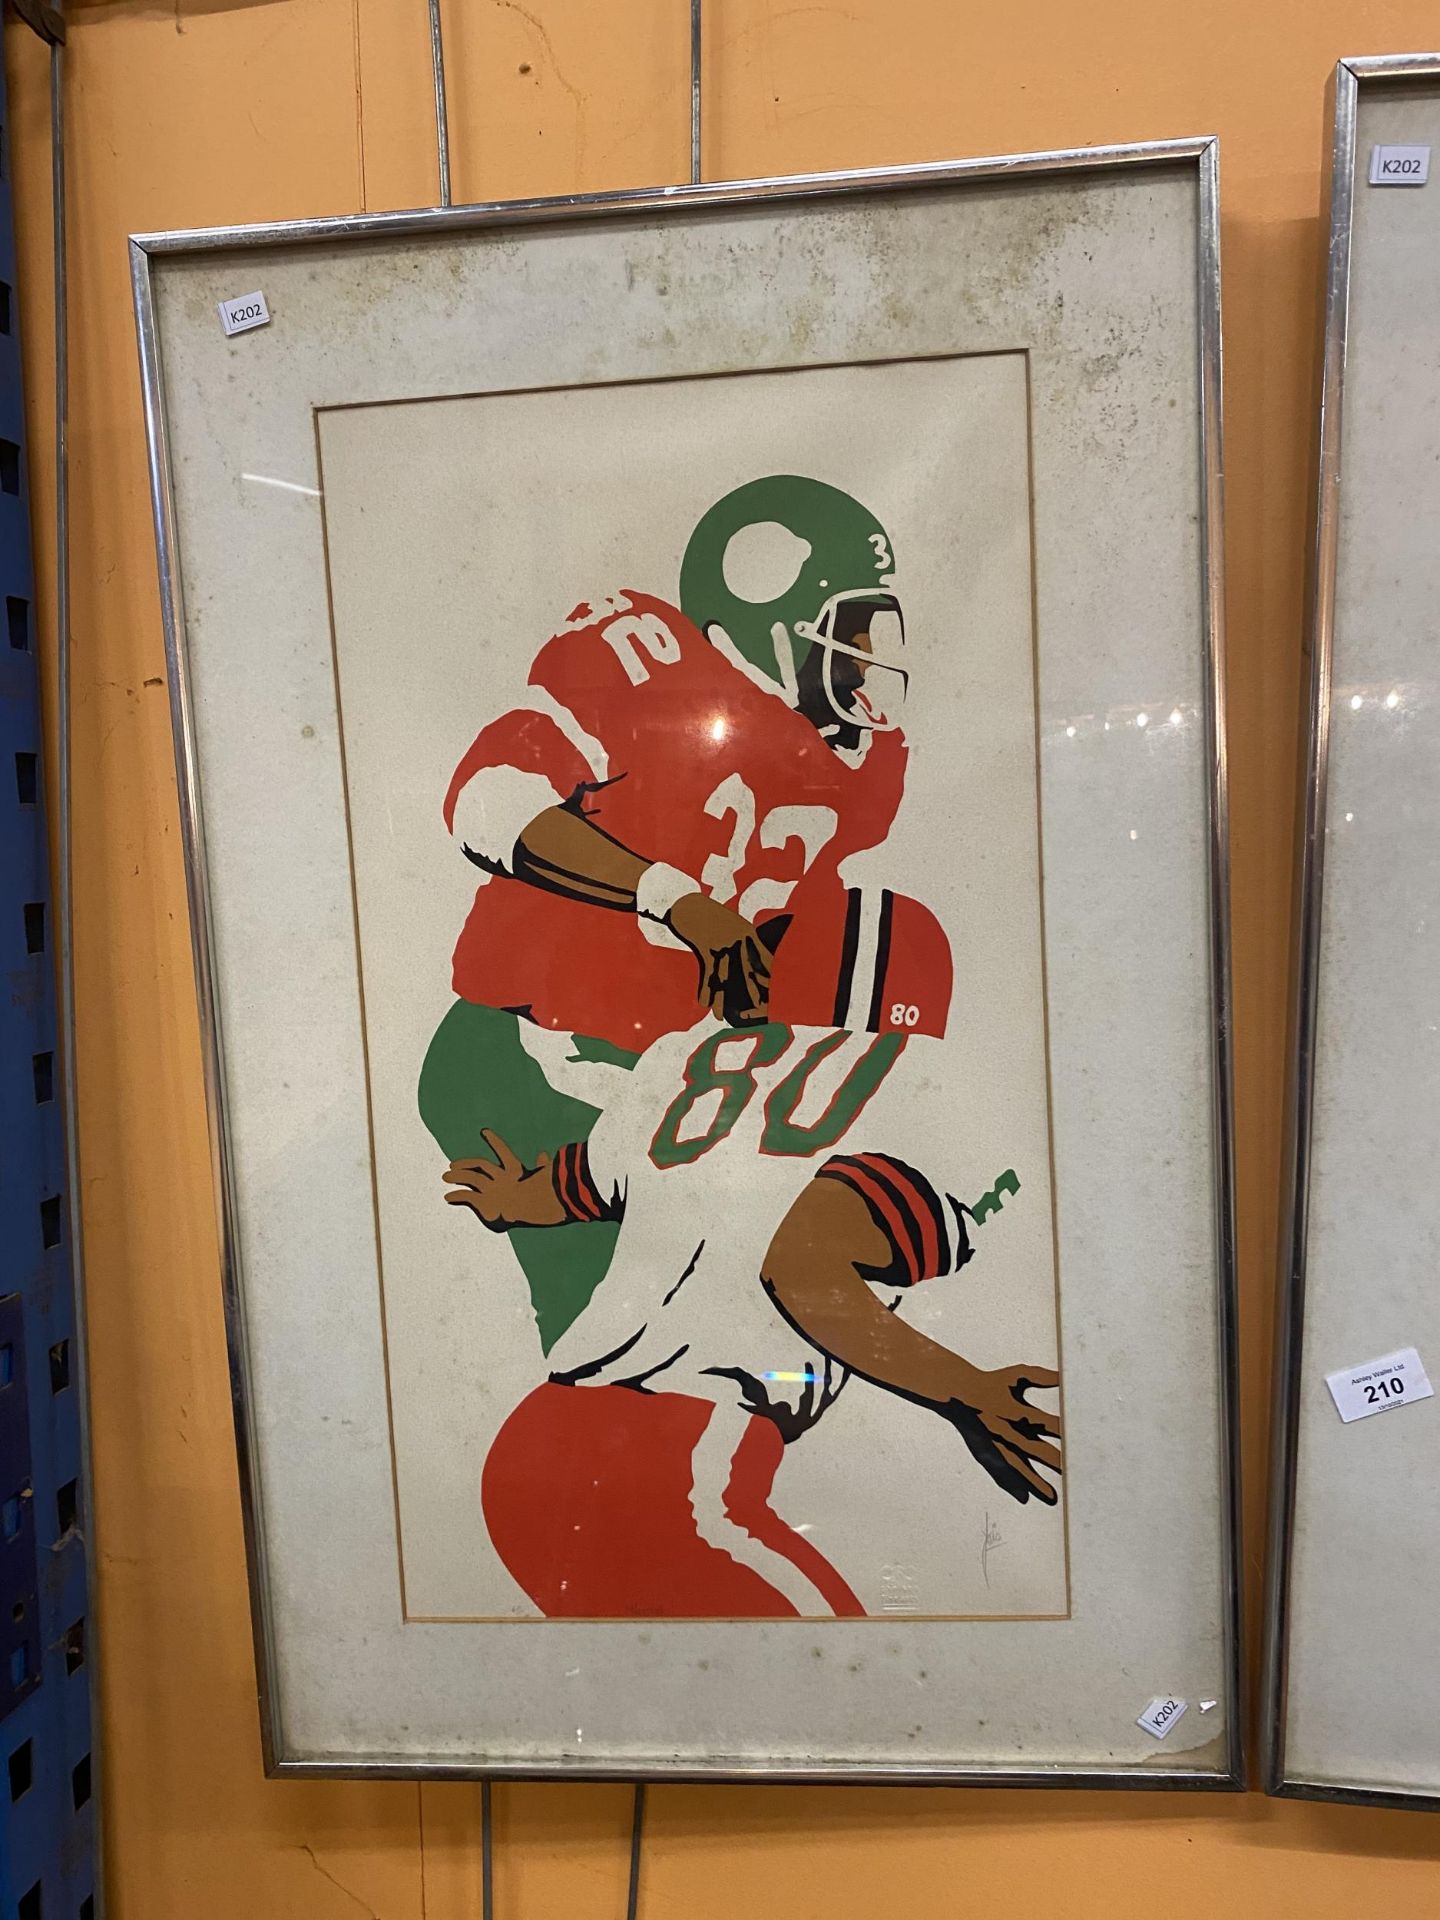 TWO FRAMED SIGNED PRINTS OF AMERICAN FOOTBALL PLAYERS. FOXING TO BOTH - Image 2 of 4